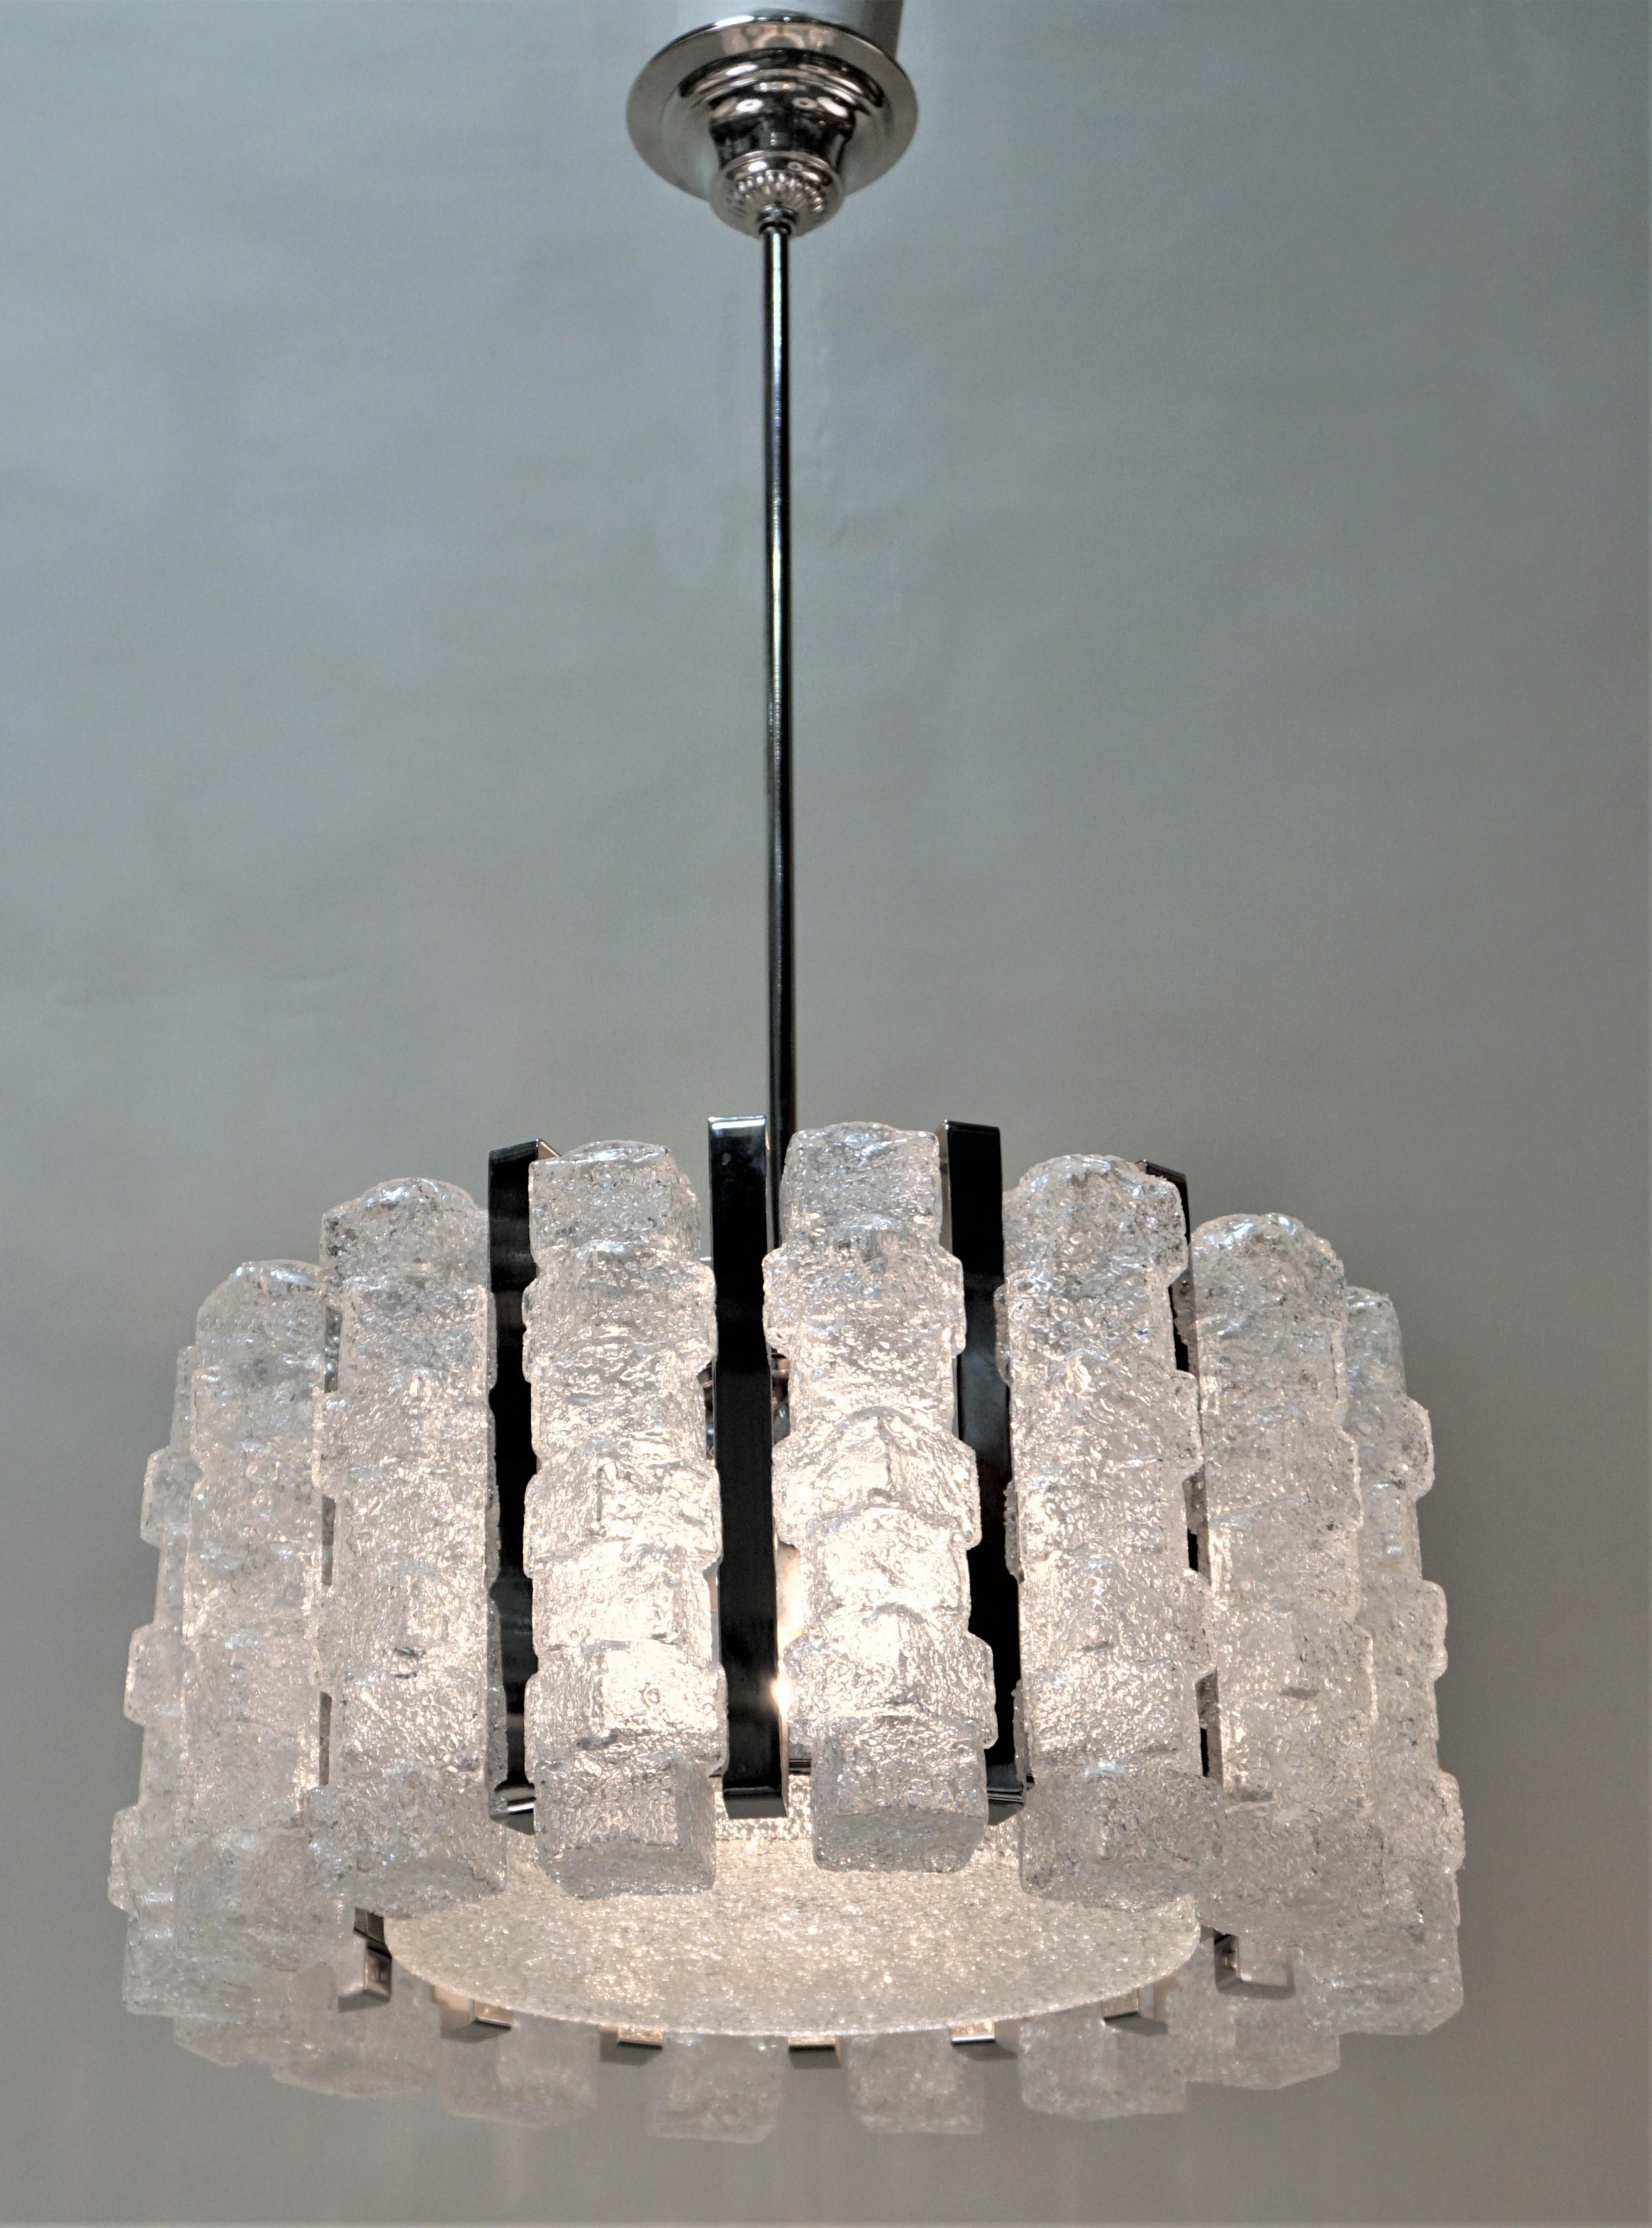 Italian 1970s ice cube glass and nickel chandelier.